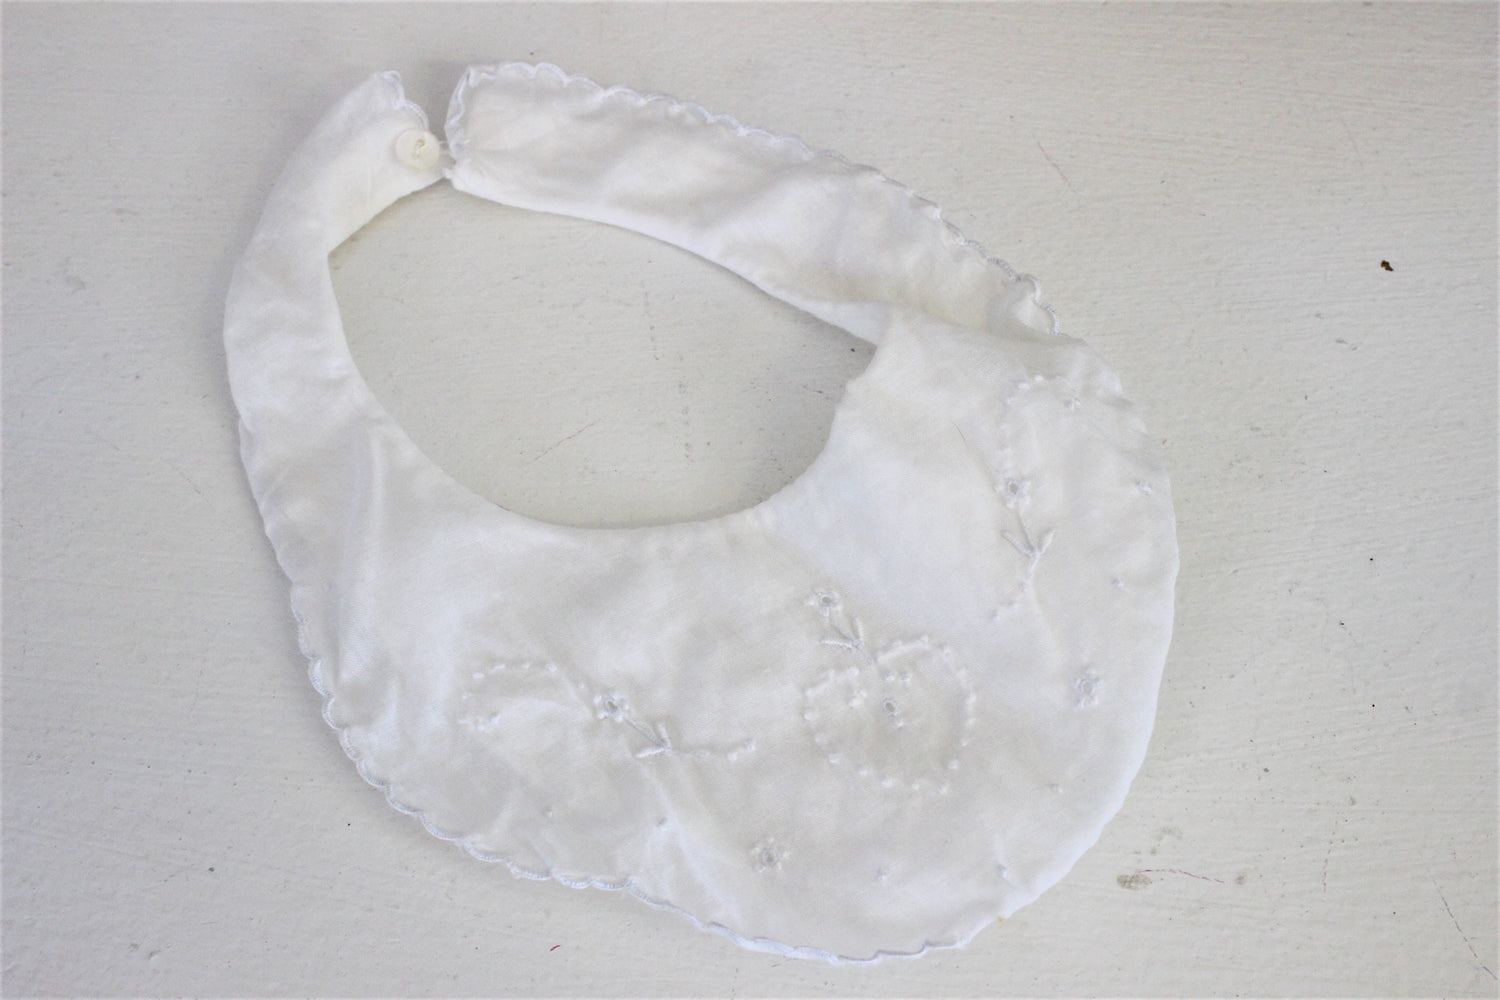 Vintage Baby Bib Embroidered / Cotton Eyelet Scalloped Edges Swiss Dots / Baby Clothes Layette Infant